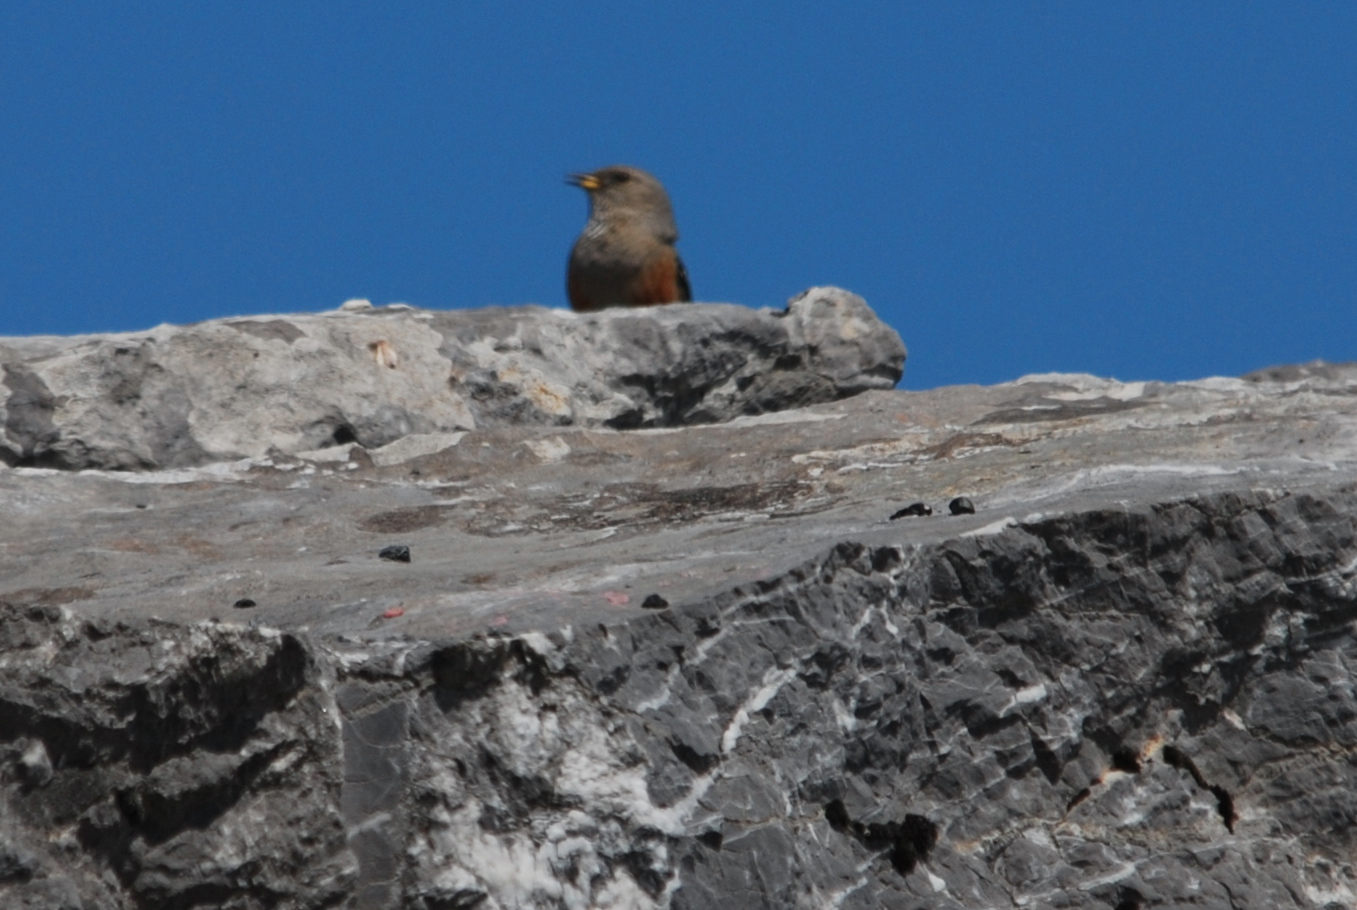 Click picture to see more Alpine Accentors.